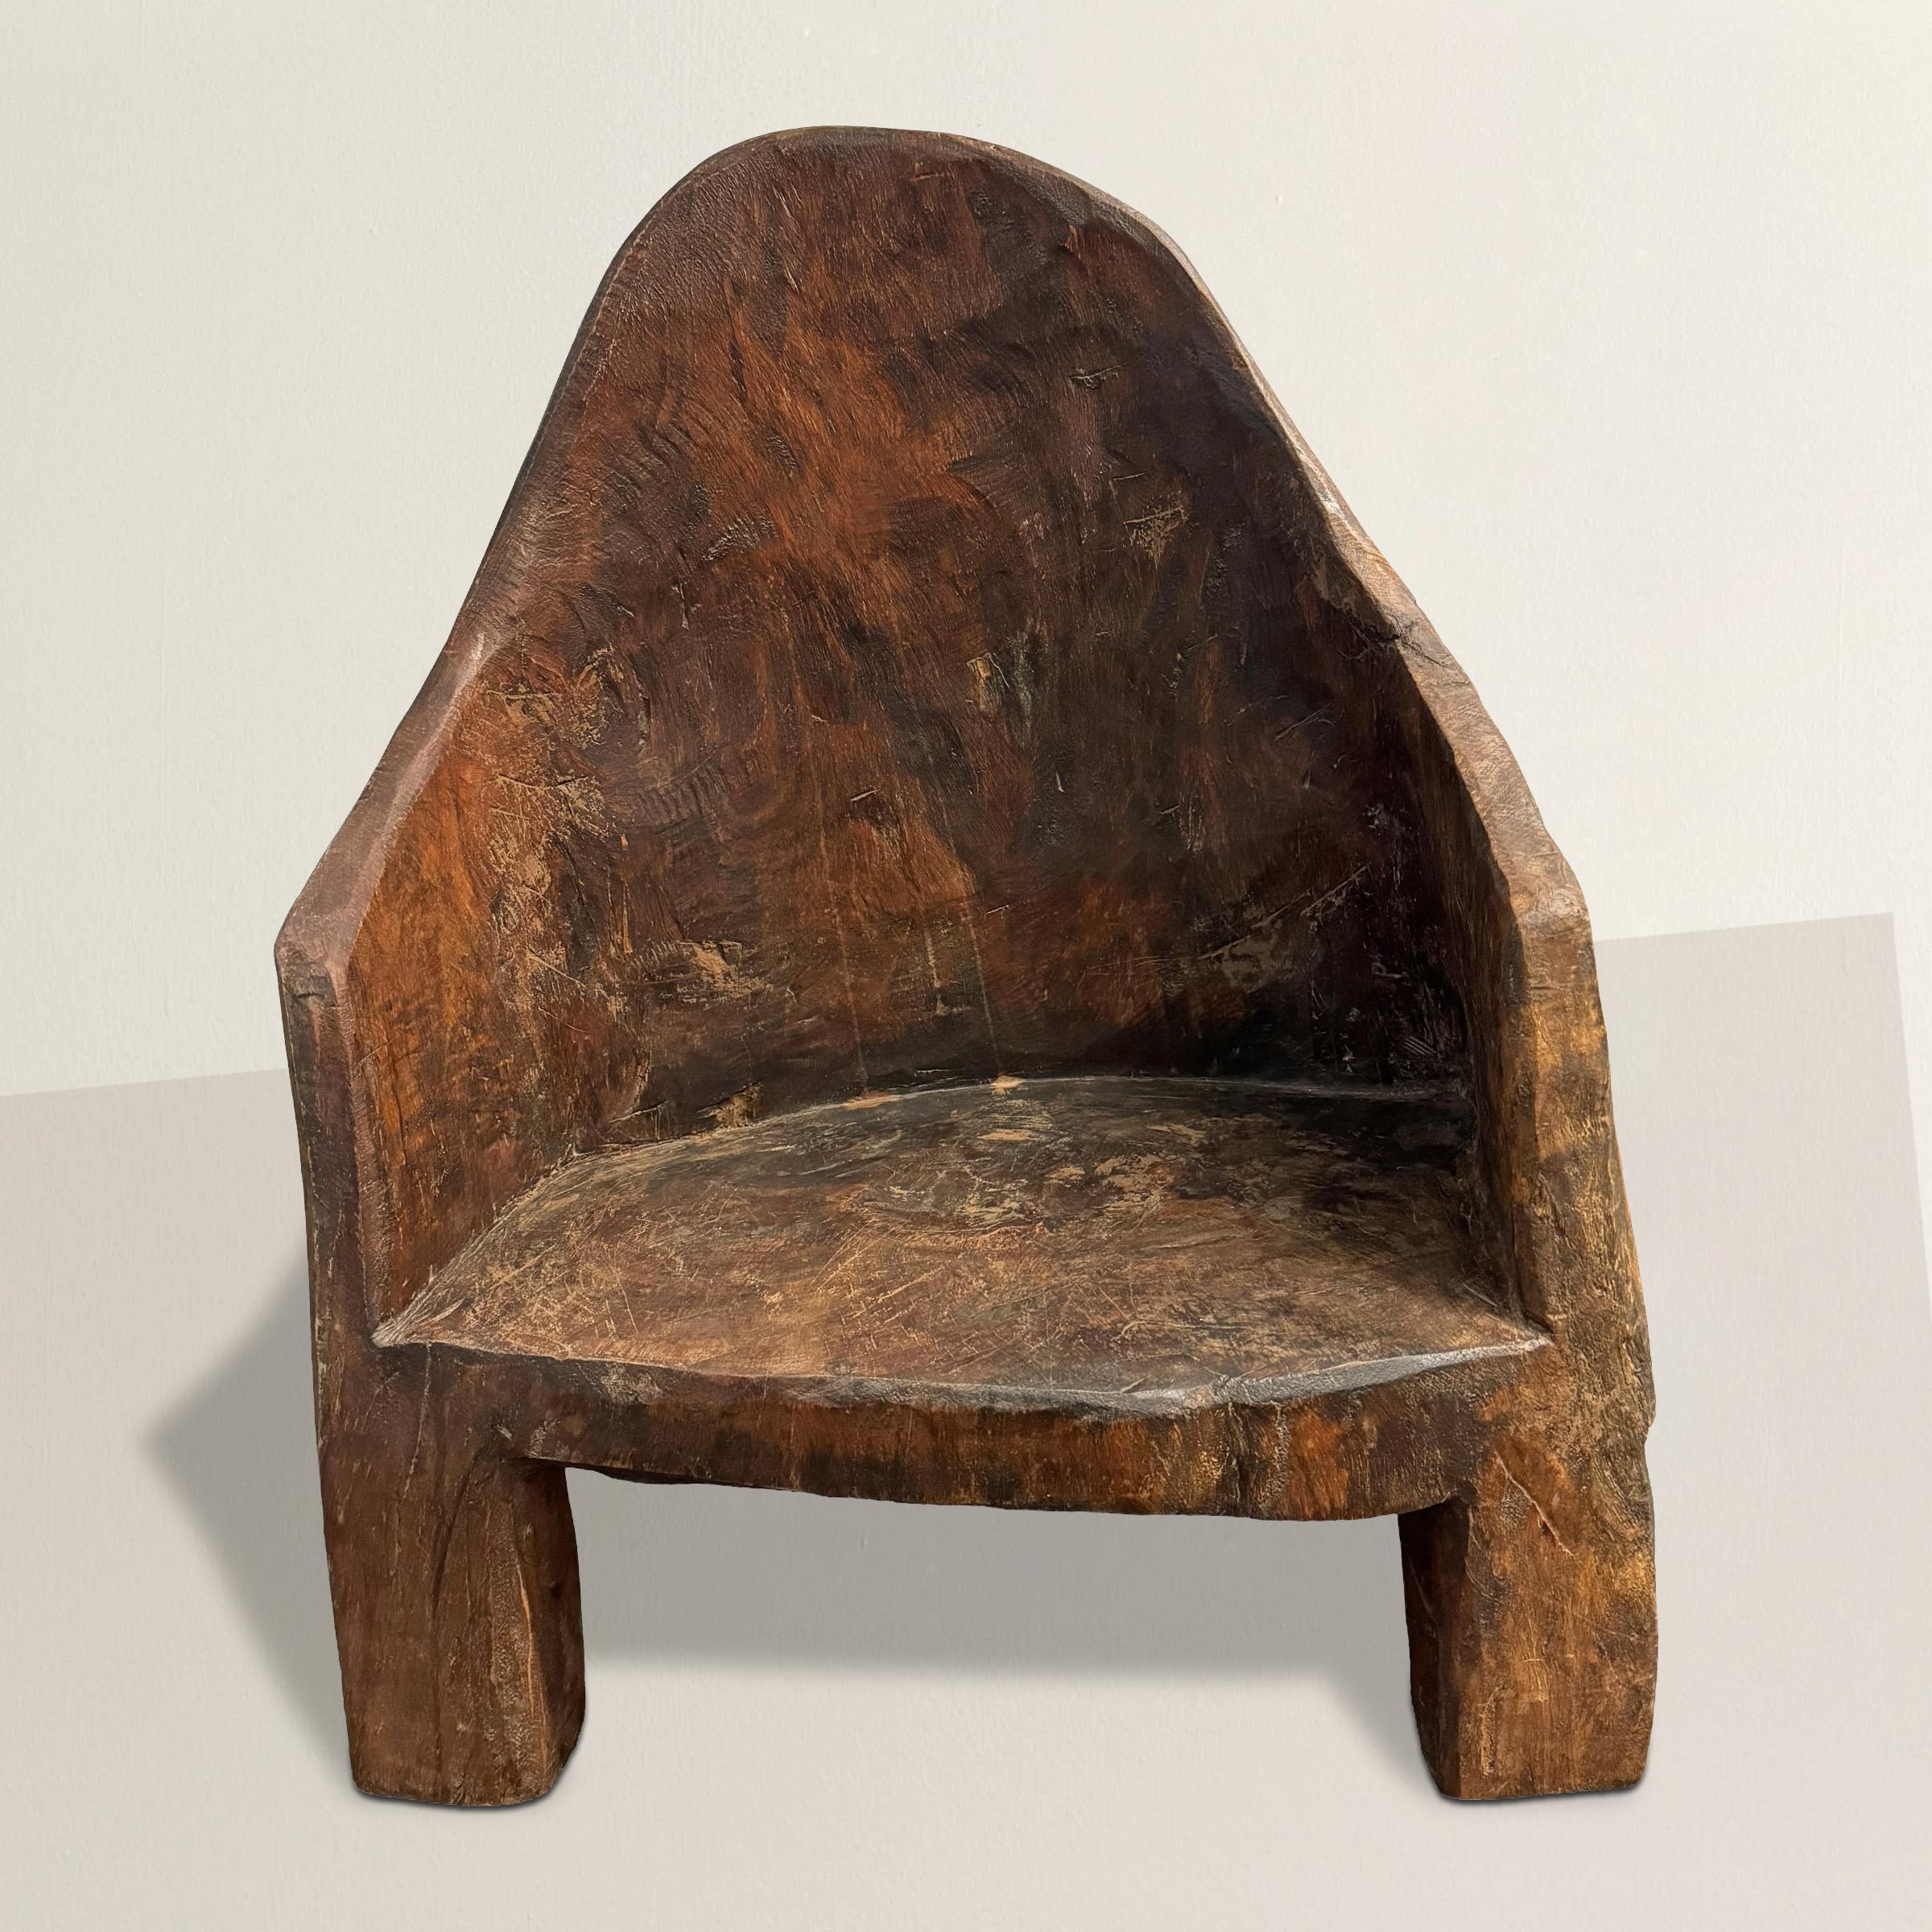 This 20th-century chair, hand-carved from a single piece of wood by the Naga people of India, is a remarkable blend of primitive charm and modern spirit. The Naga people, known for their rich cultural heritage and skilled craftsmanship, have created